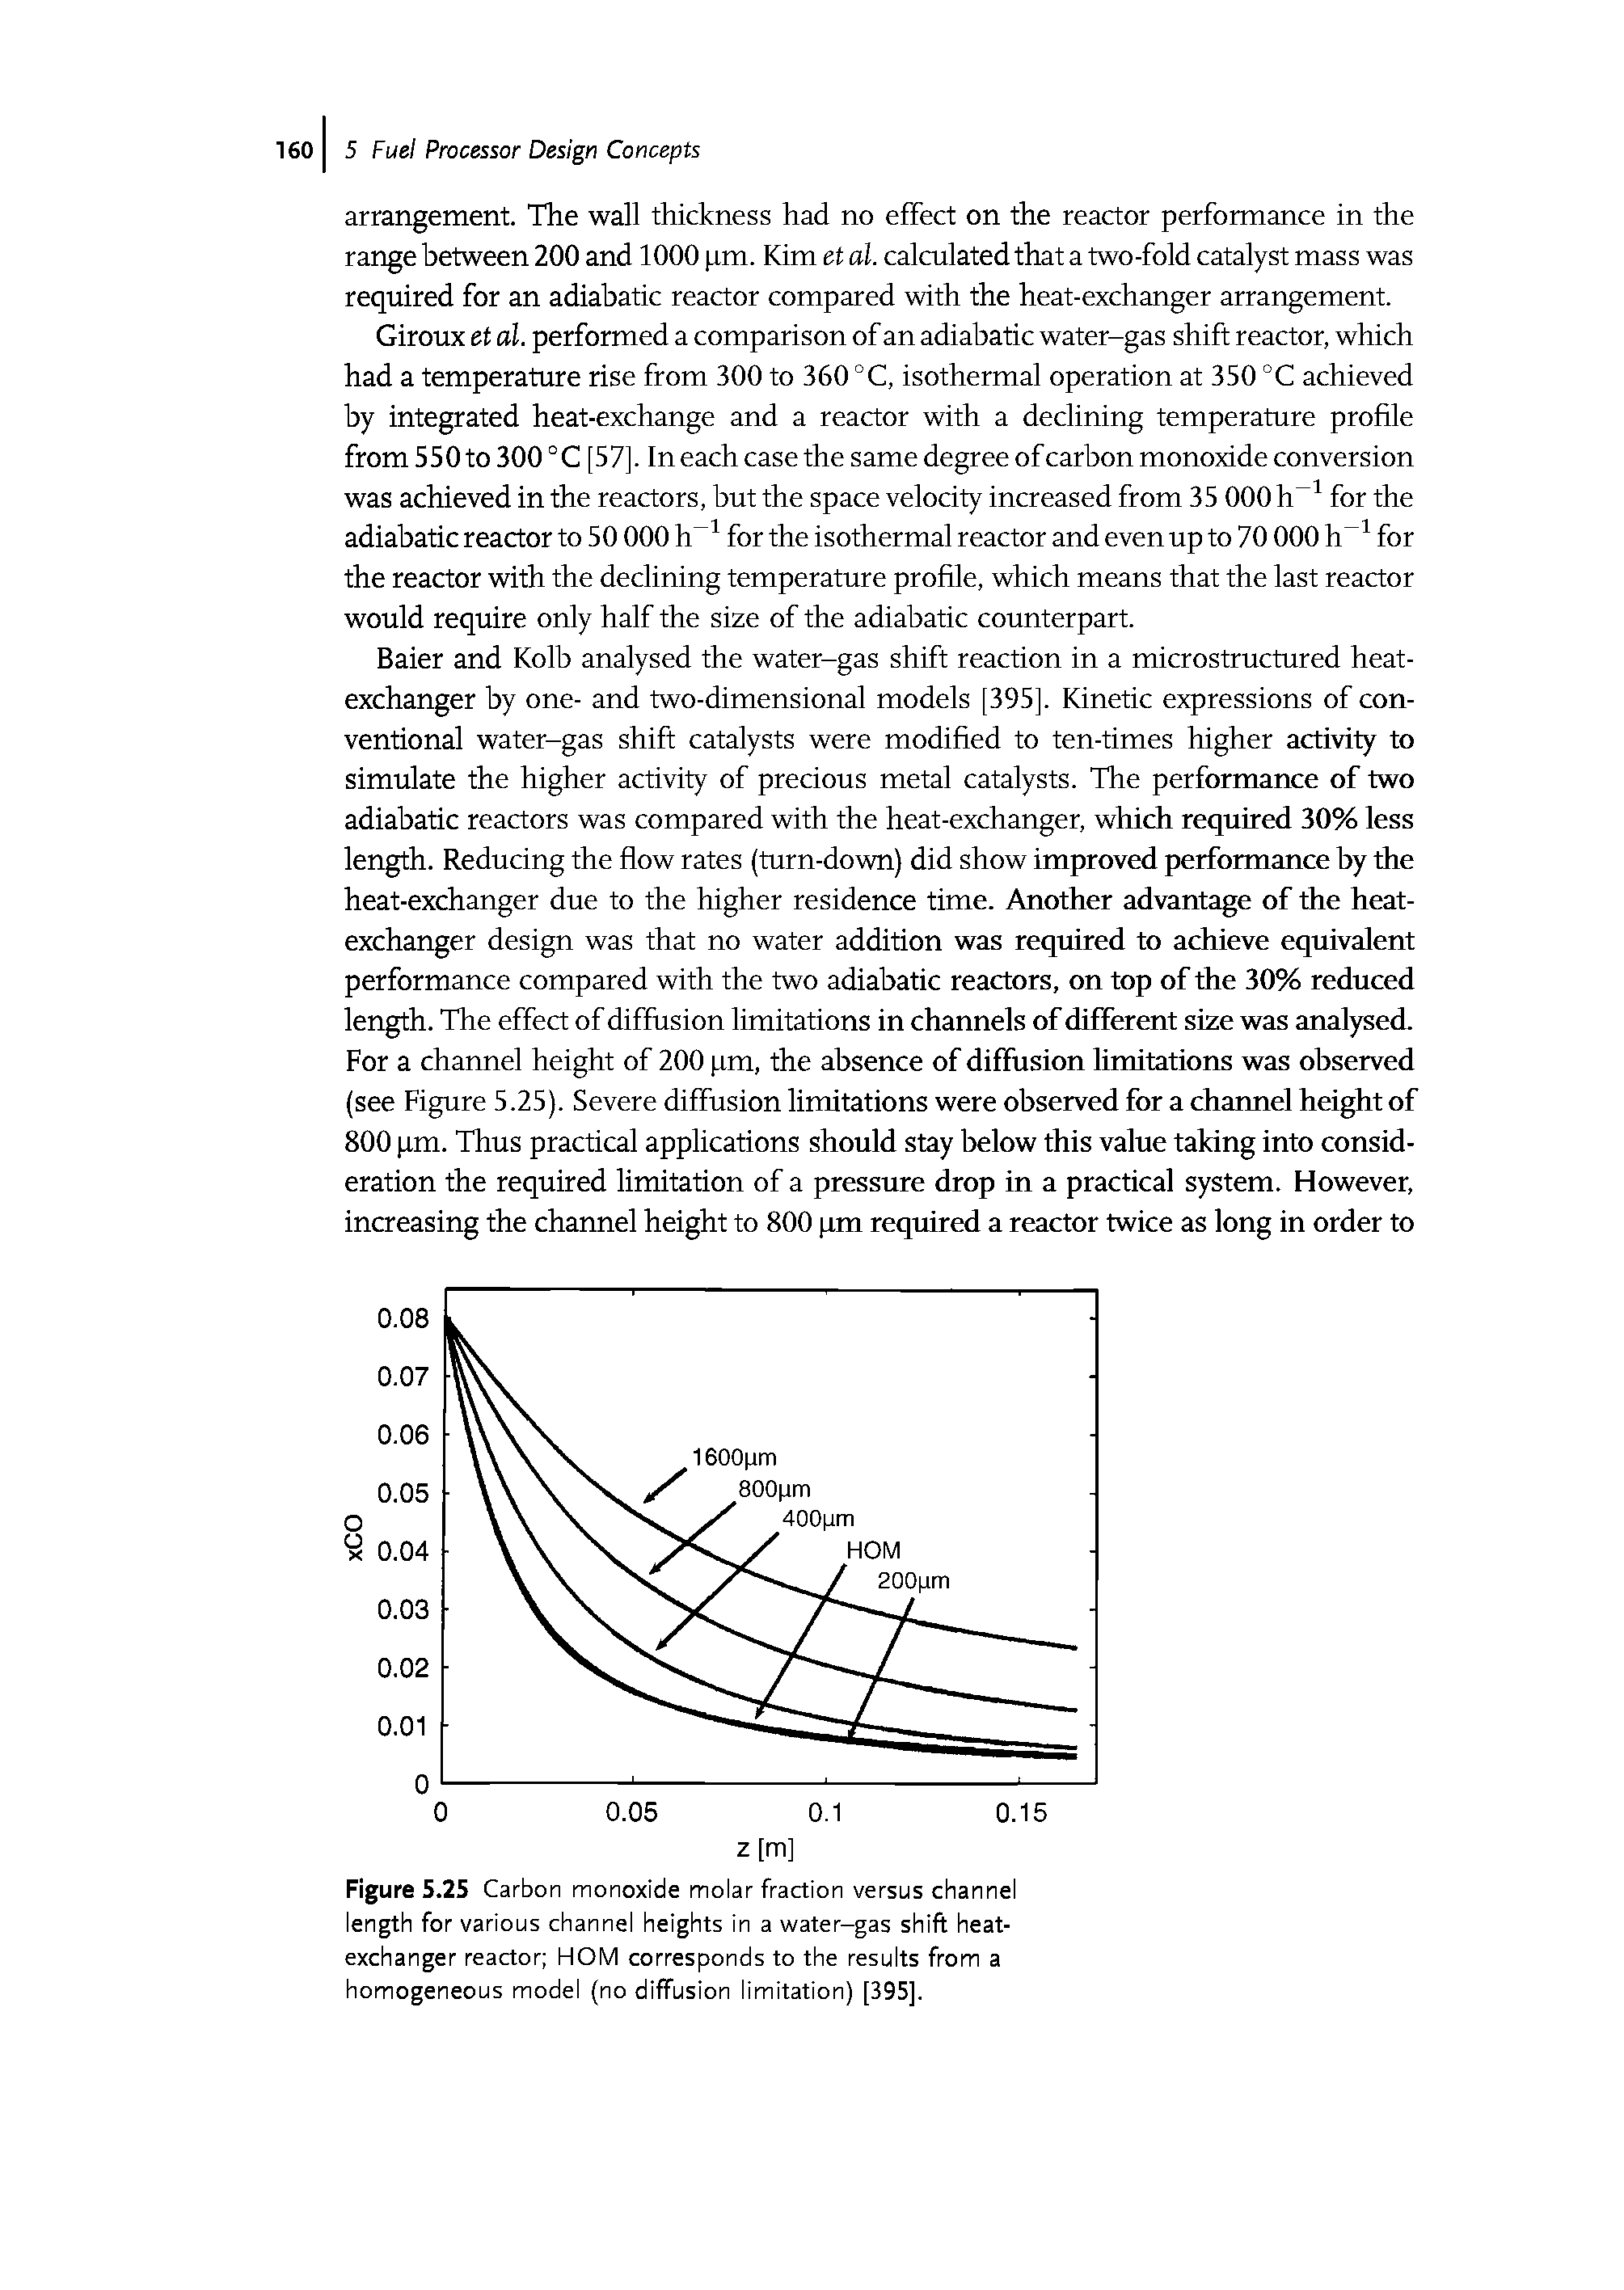 Figure 5.25 Carbon monoxide molar fraction versus channel length for various channel heights in a water- as shift heat-exchanger reactor HOM corresponds to the results from a homogeneous model (no diffusion limitation) [395].